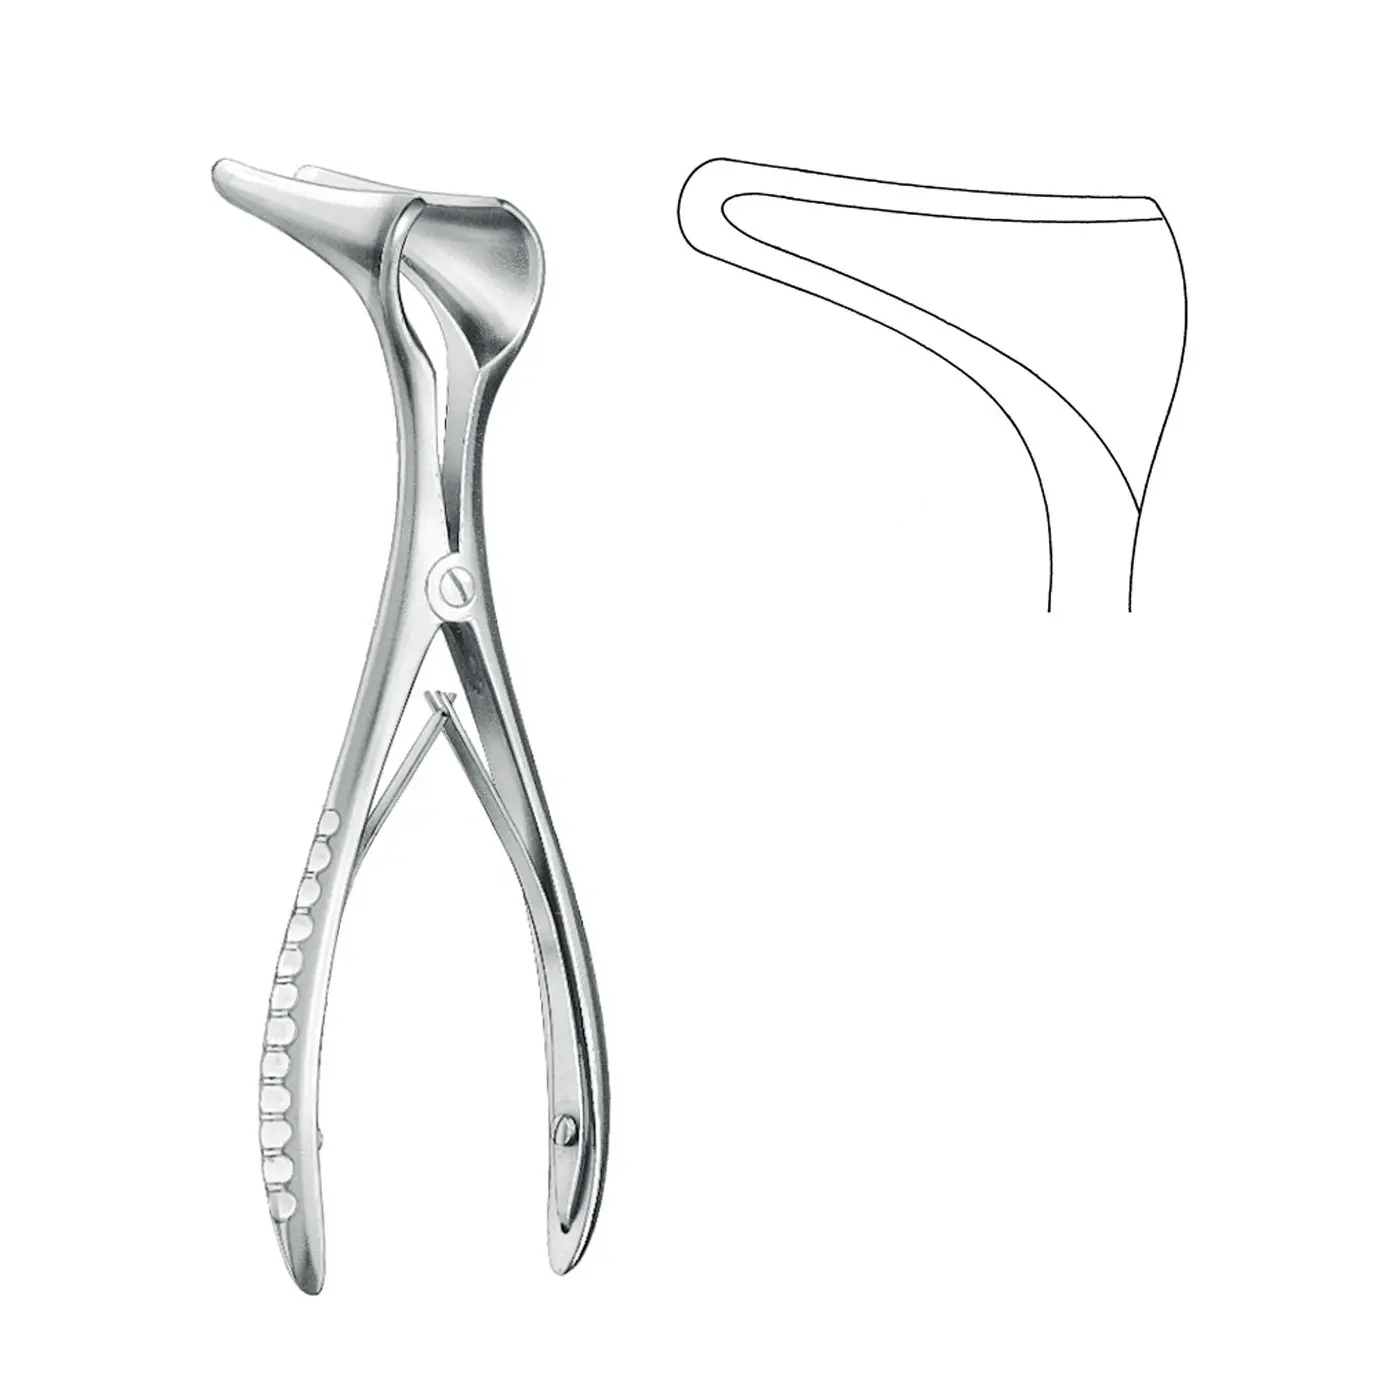 COTTLE Nasal Speculum 13.5 Cm/5-1/4" 75 mm / Rhinoplasty Surgical Instruments / Plastic Surgery BY SIGAL MEDCO